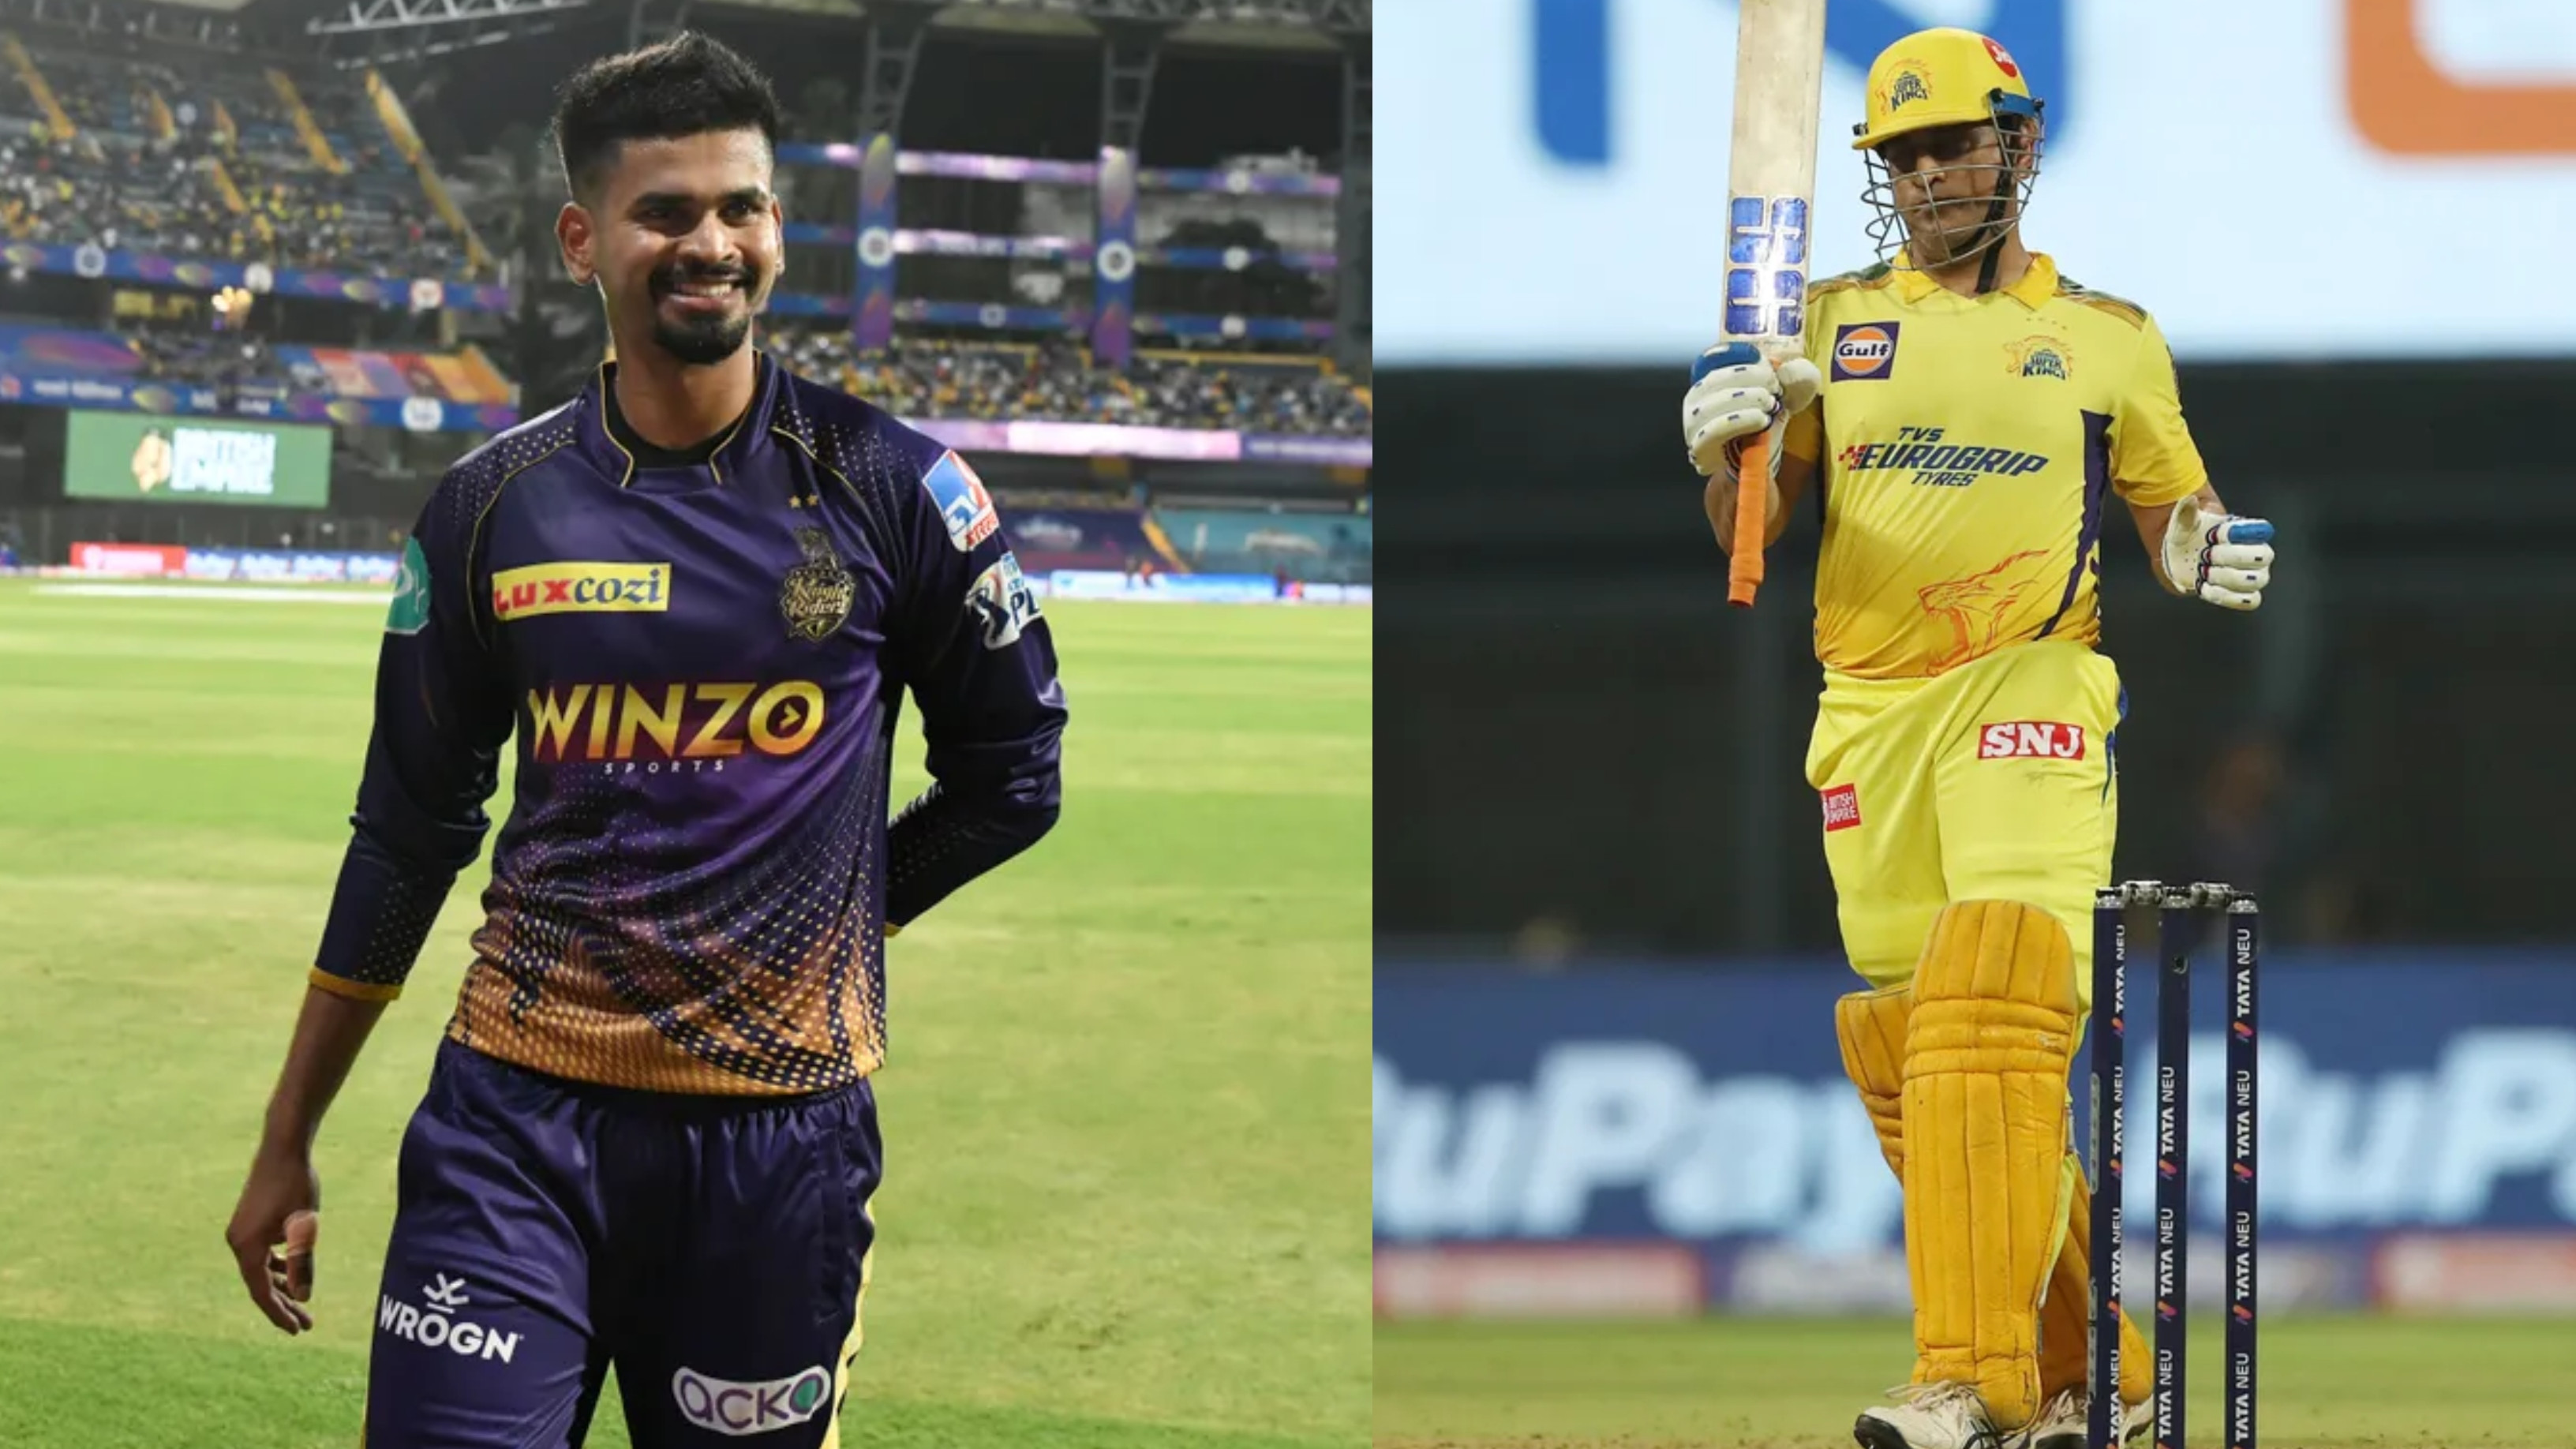 IPL 2022: “There is always tension when MS Dhoni is batting”, Shreyas Iyer after KKR’s big win over CSK